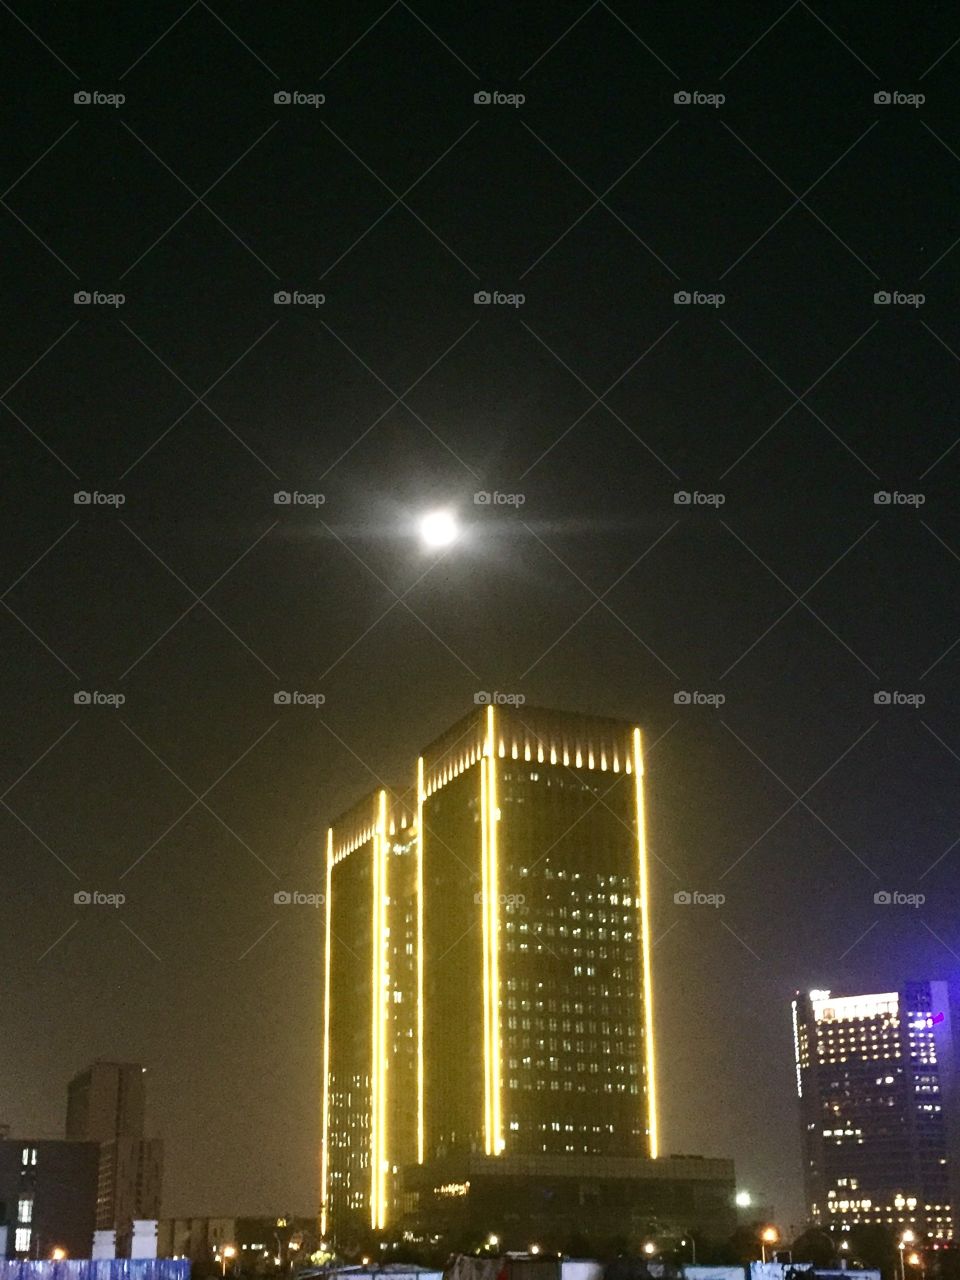 The moon hung over the Nokia building, shines like a beacon